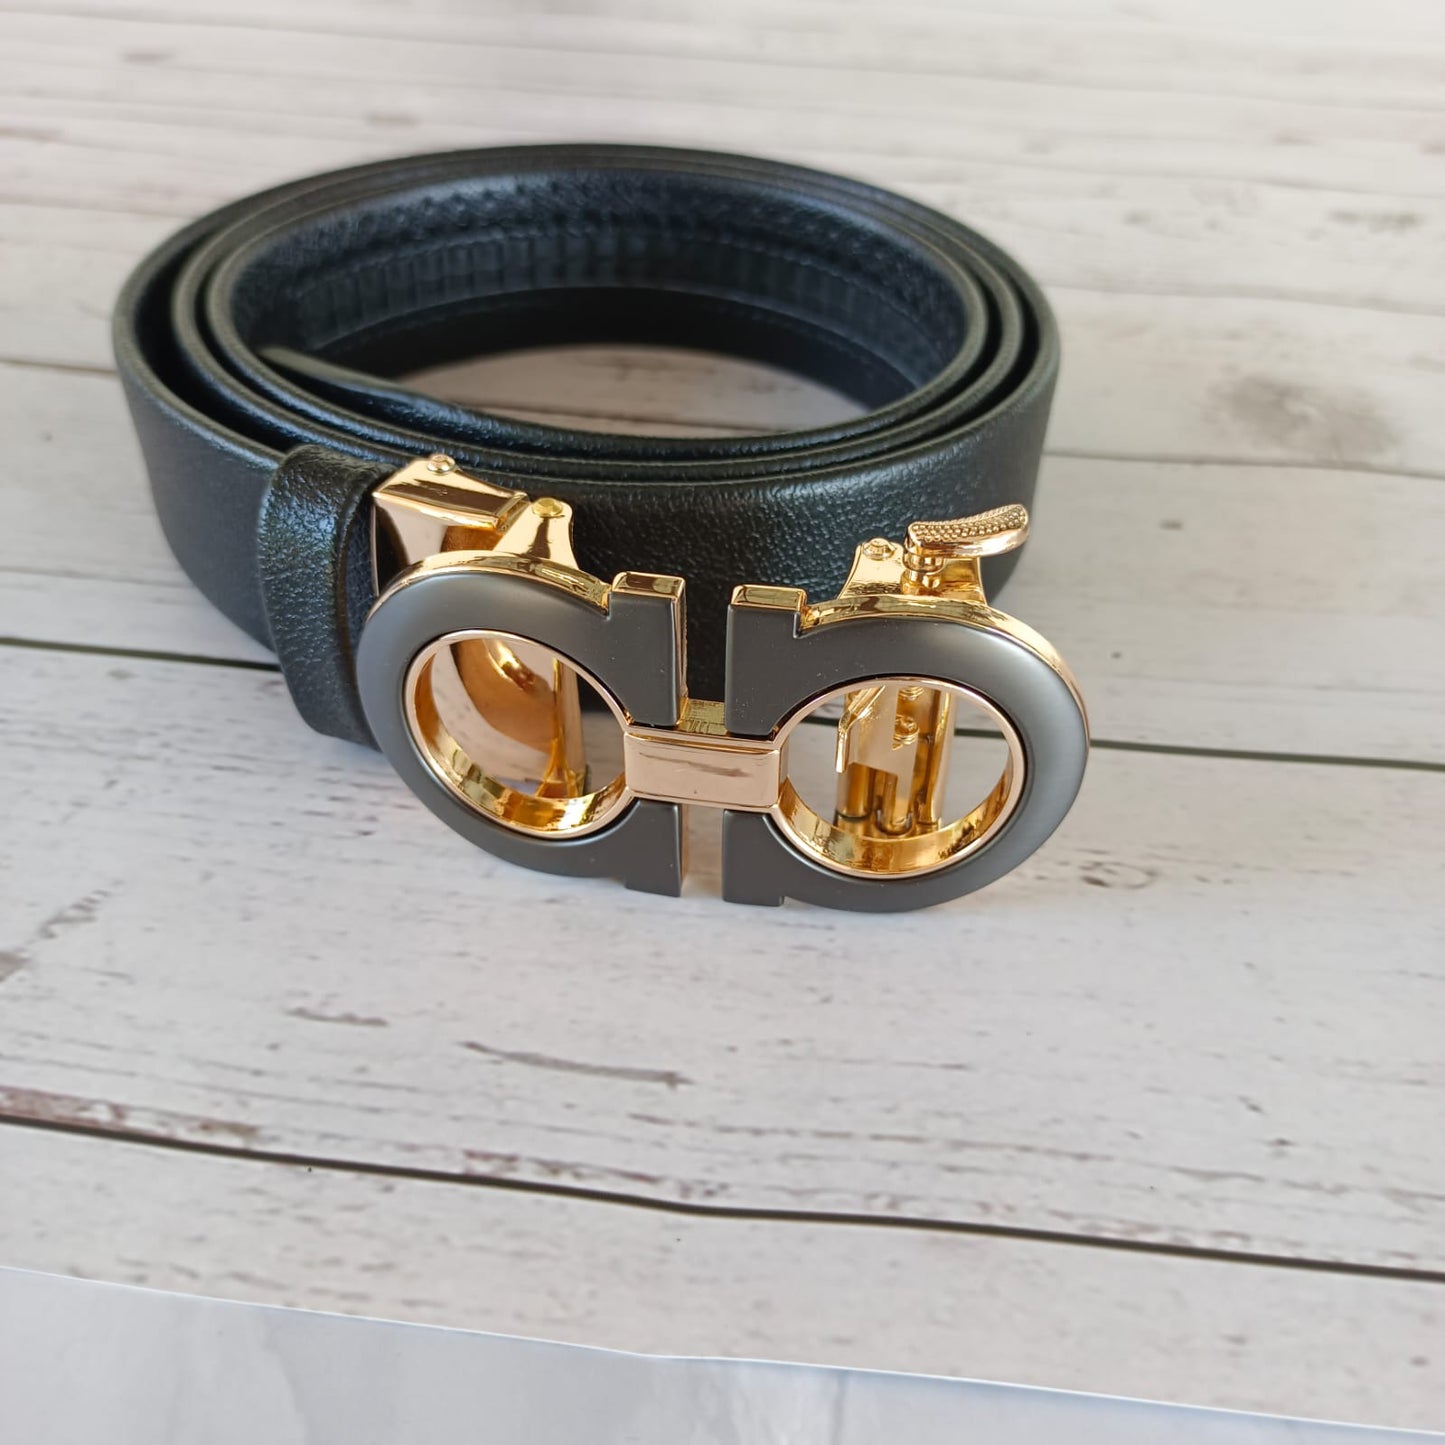 Alloy Automatic Buckle Belt Business Affairs Casual